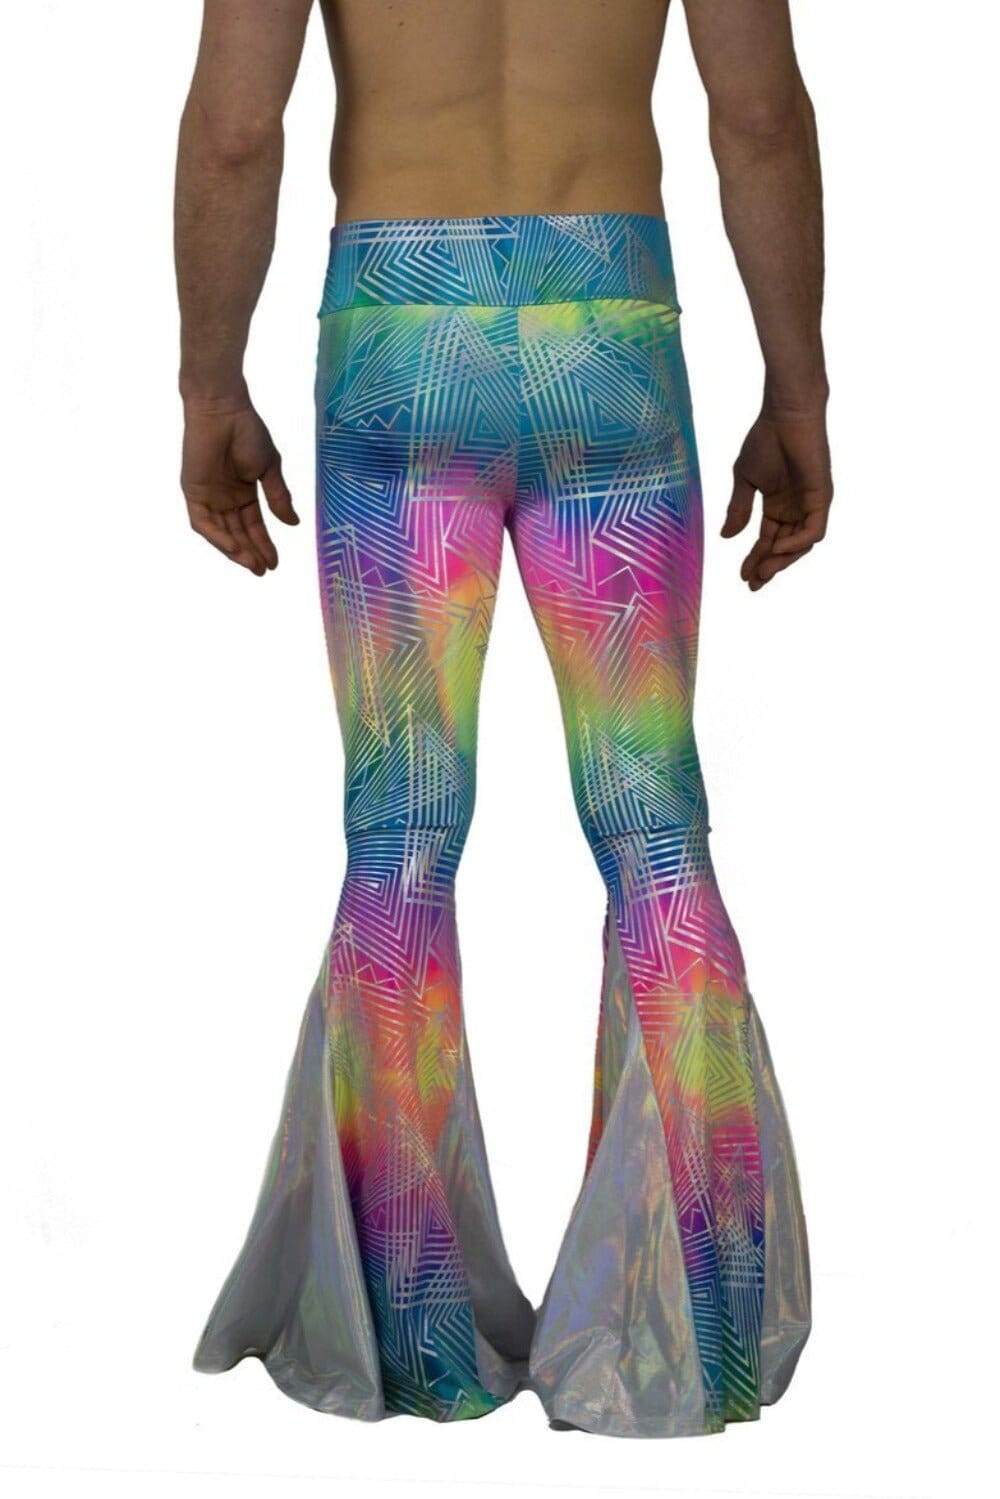 Mens Holographic bell bottoms Neon meggings by Love Khaos